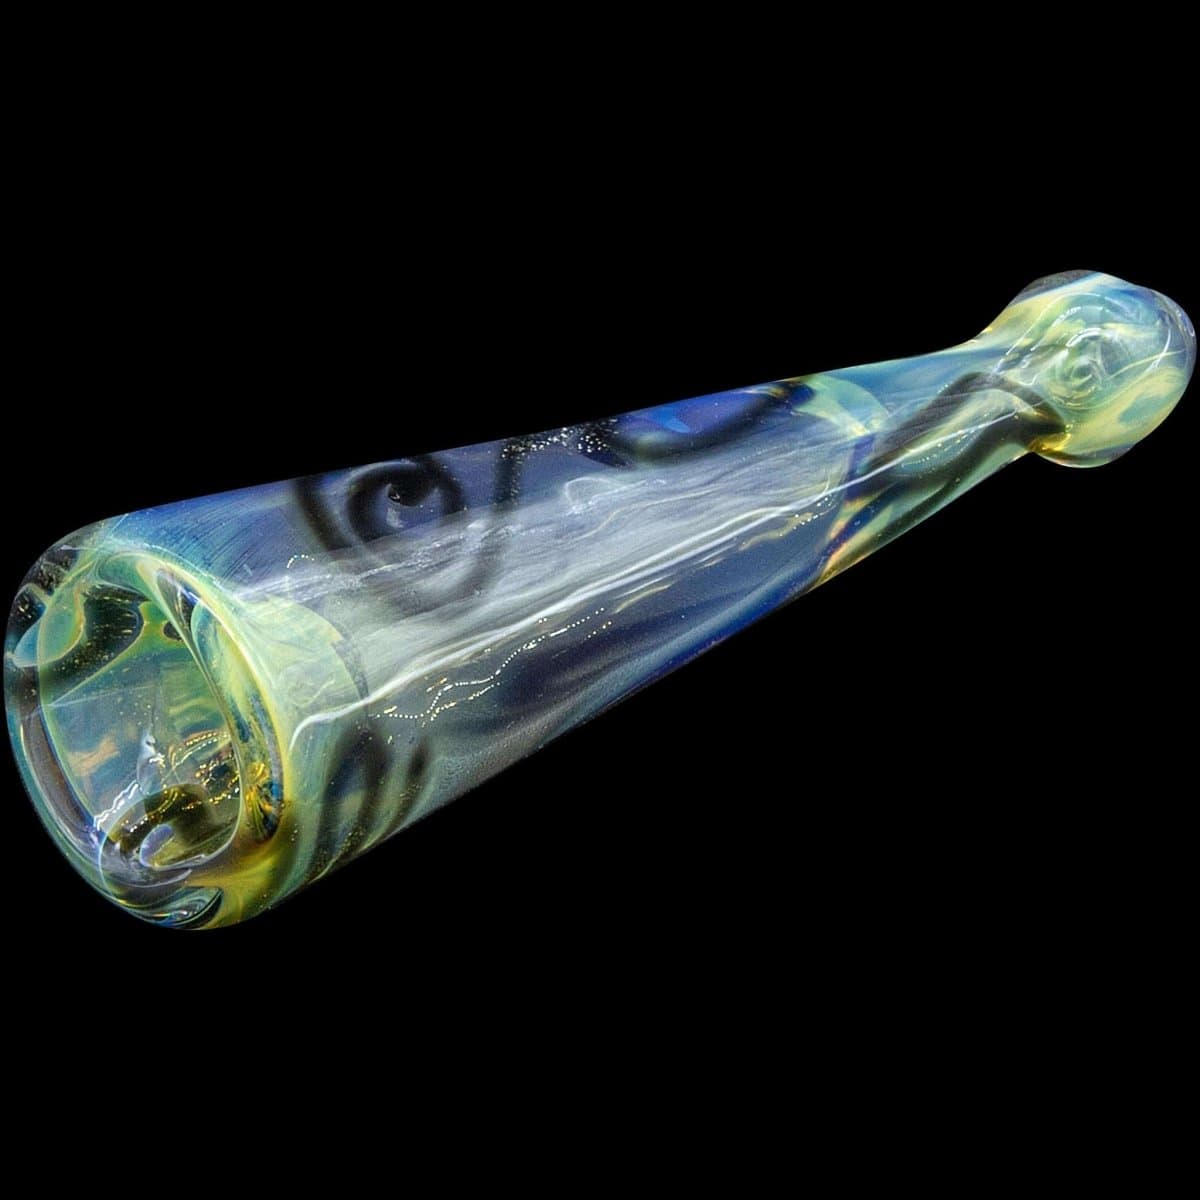 LA Pipes Hand Pipe Black "Warrior Piper" Inside-Out Funnel Chillum Herb Pipe